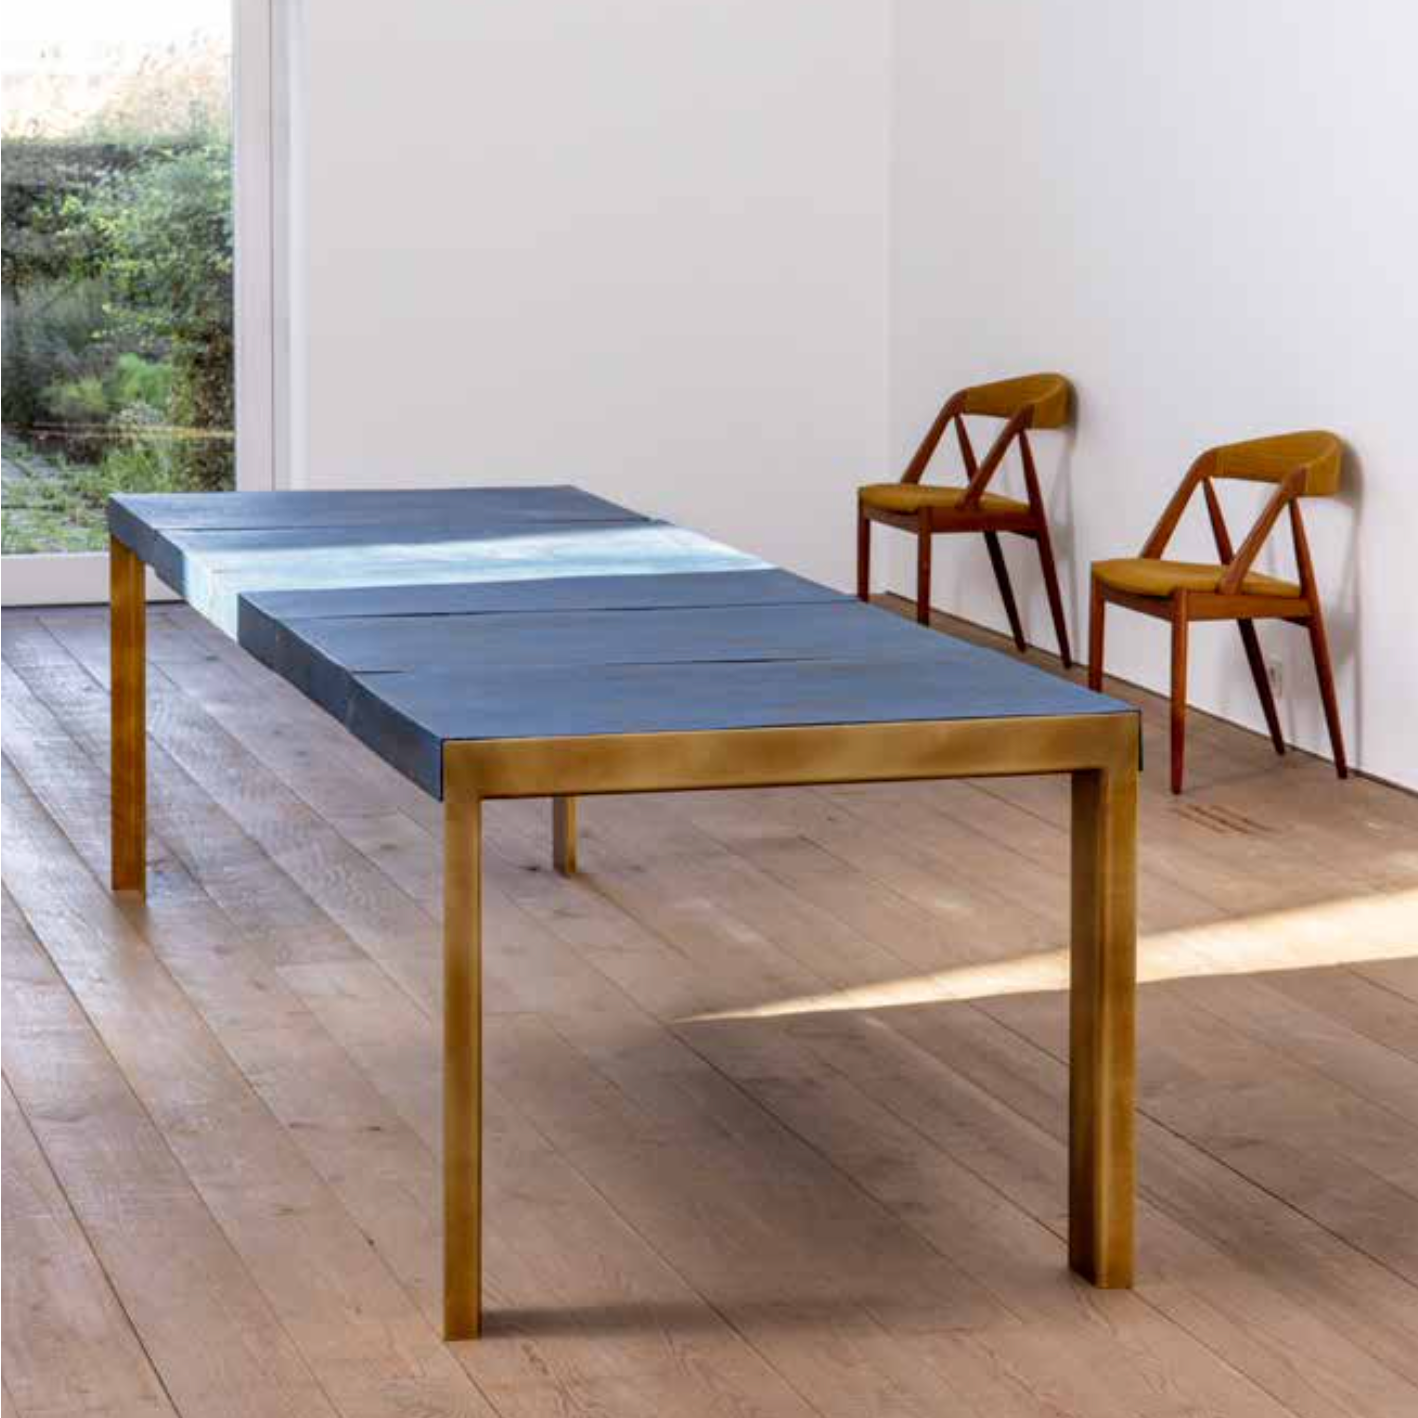 CLAY TABLE BLUE